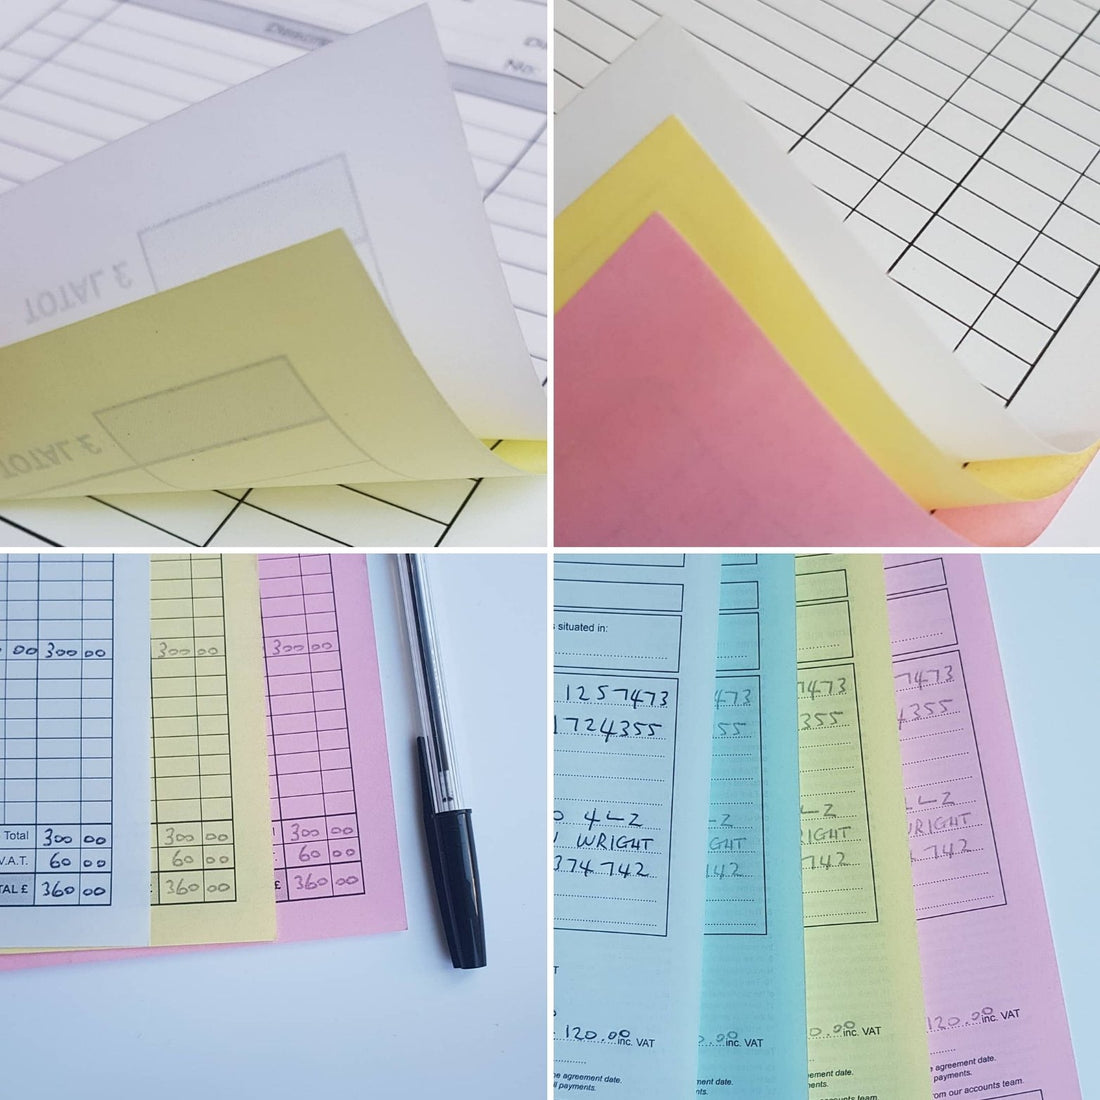 Bespoke Printed Forms - Made to Order for Business Use!